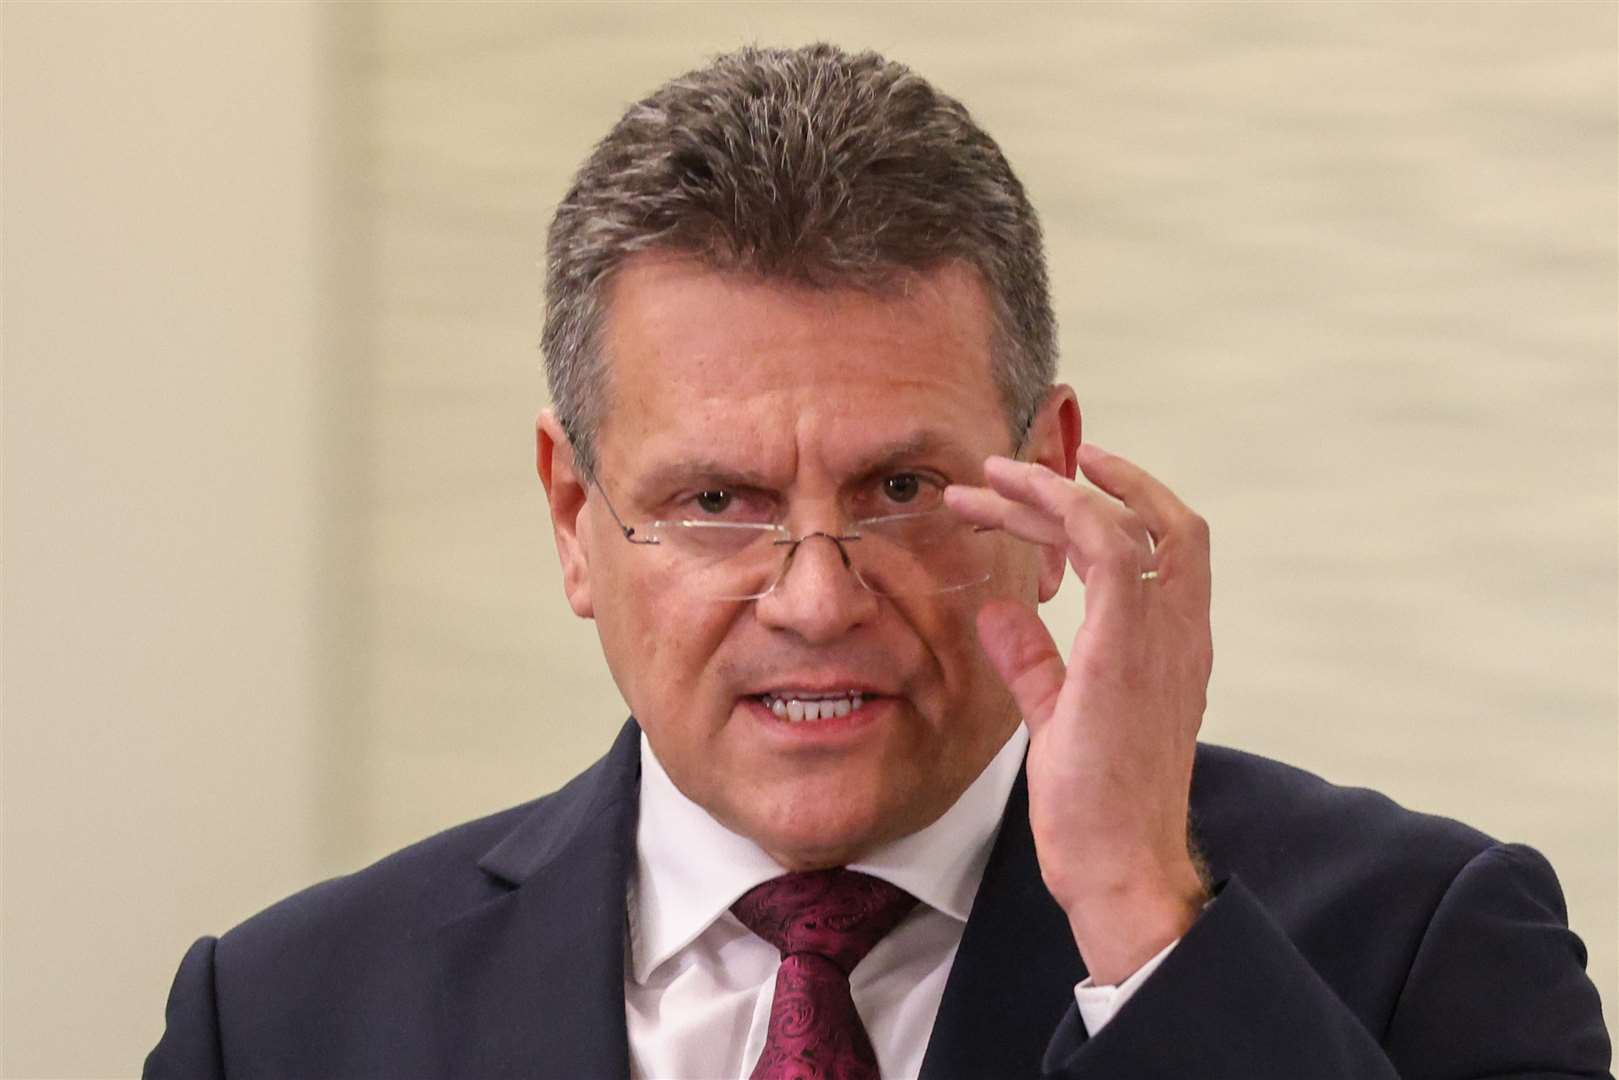 EU Commission vice president Maros Sefcovic said the Bill is ‘extremely damaging to mutual trust and respect between the EU and the UK’ (Hollie Adams/PA)